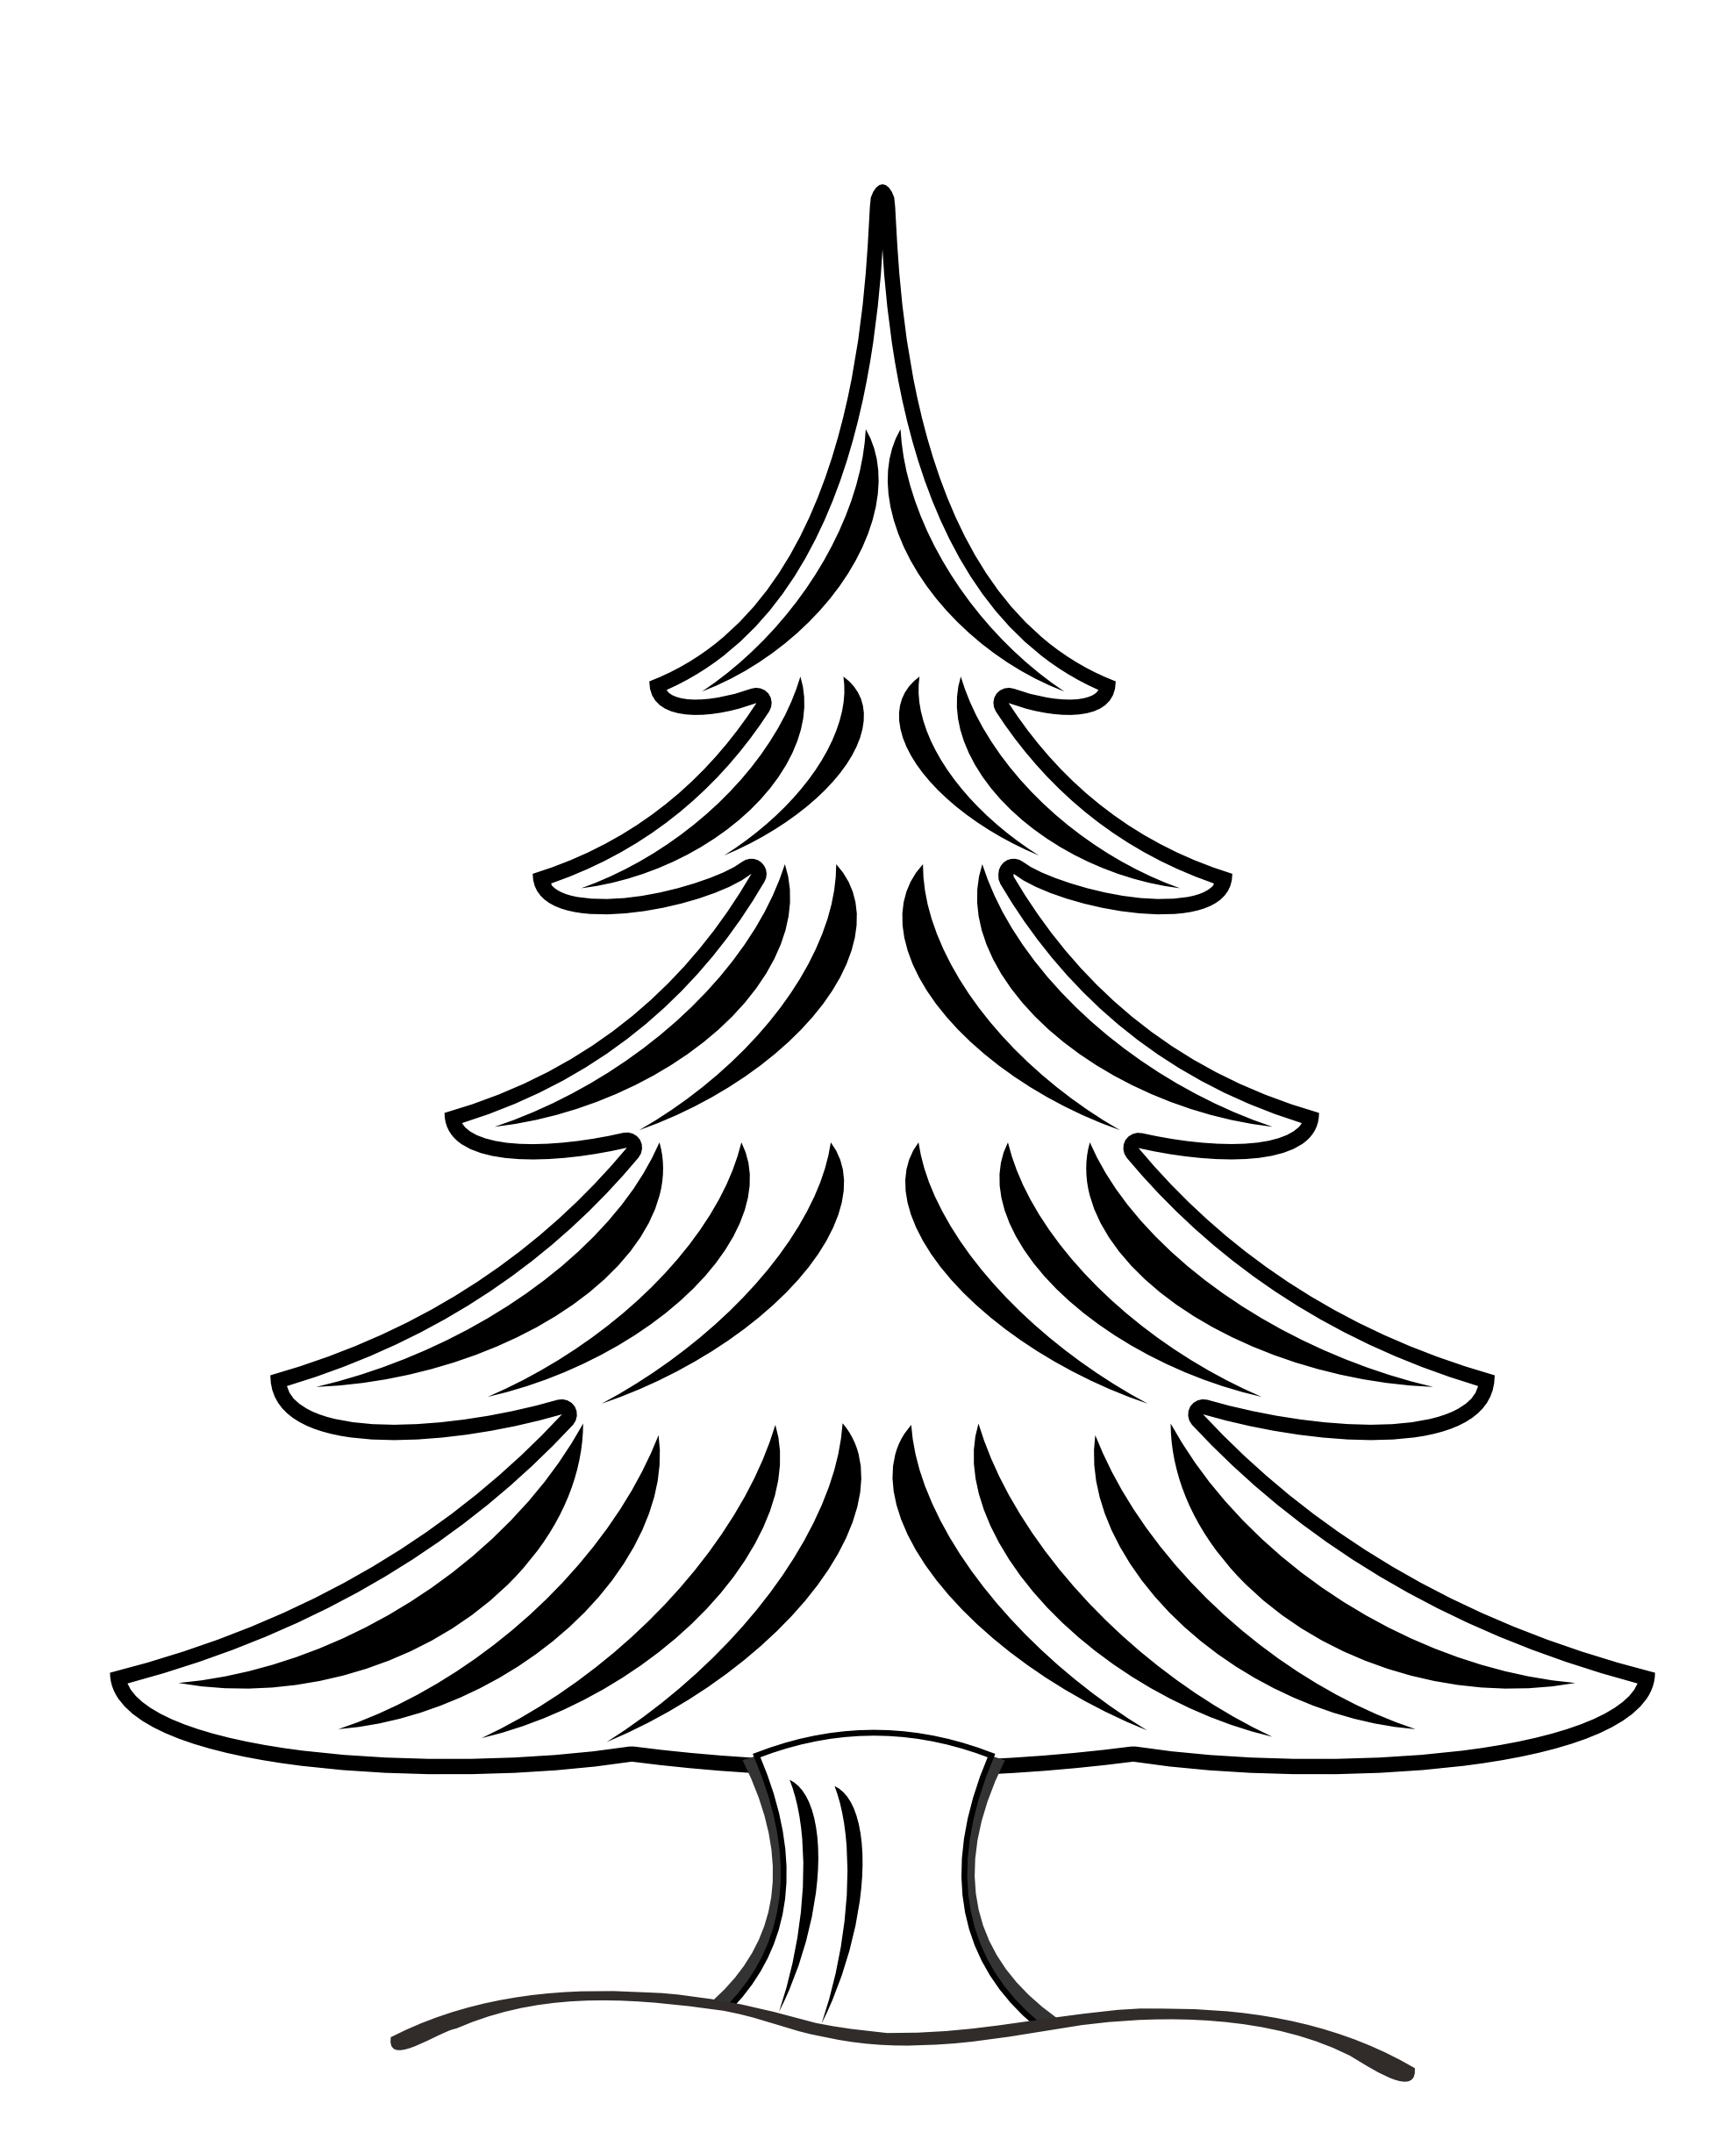 Pine Tree Black And White Image Clipart